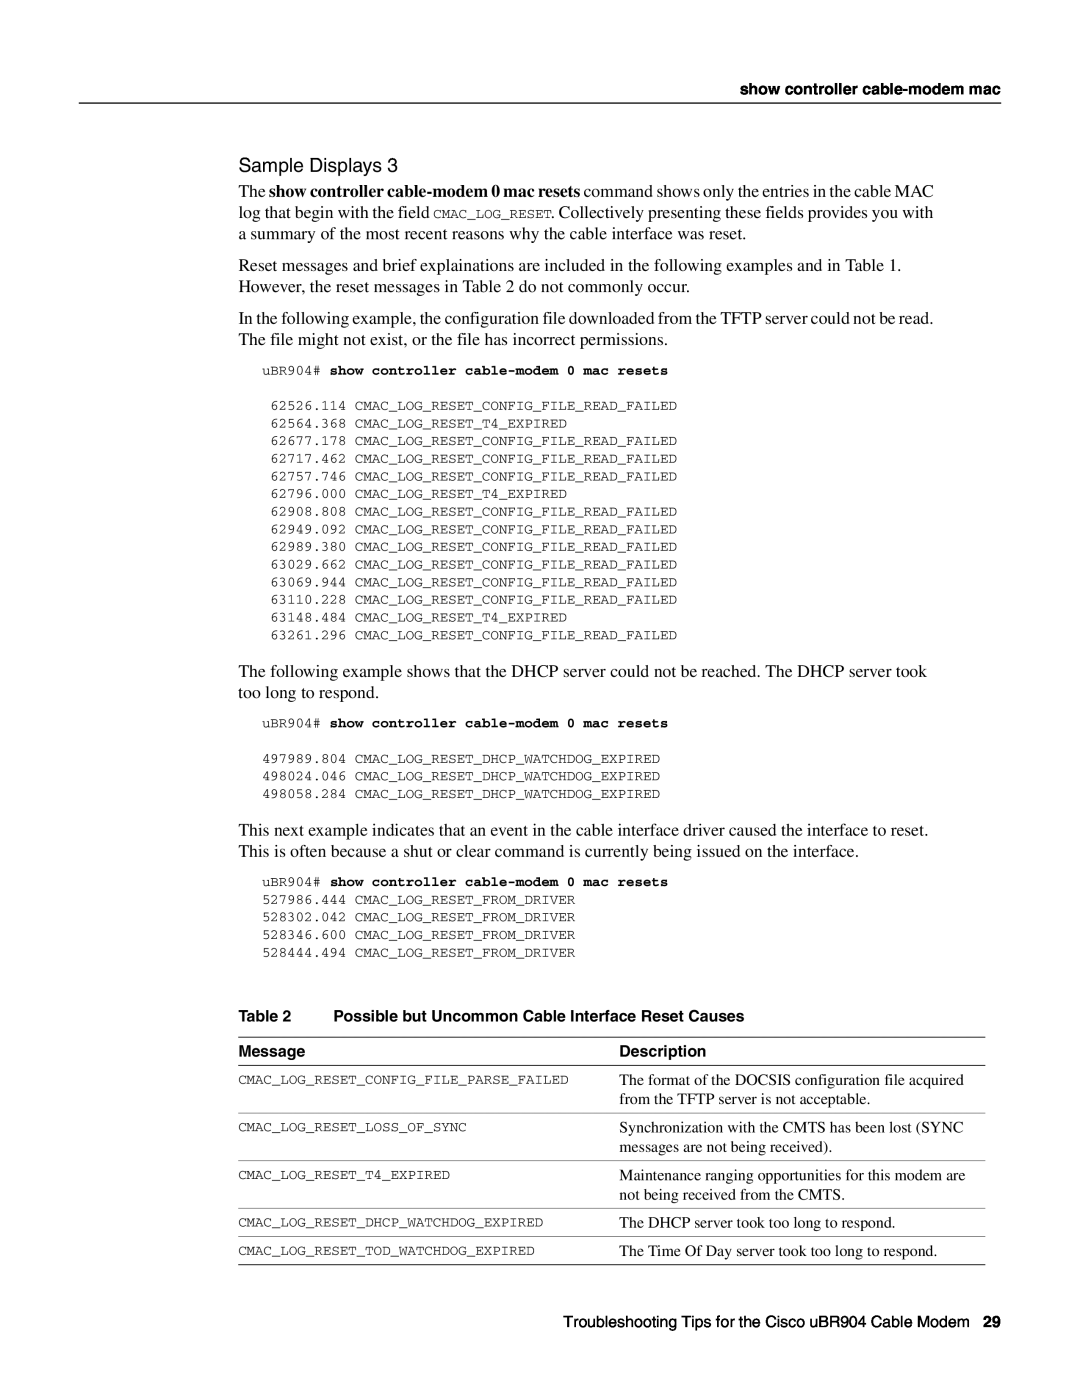 Cisco Systems UBR904 manual Sample Displays, The format of the DOCSIS configuration file acquired 